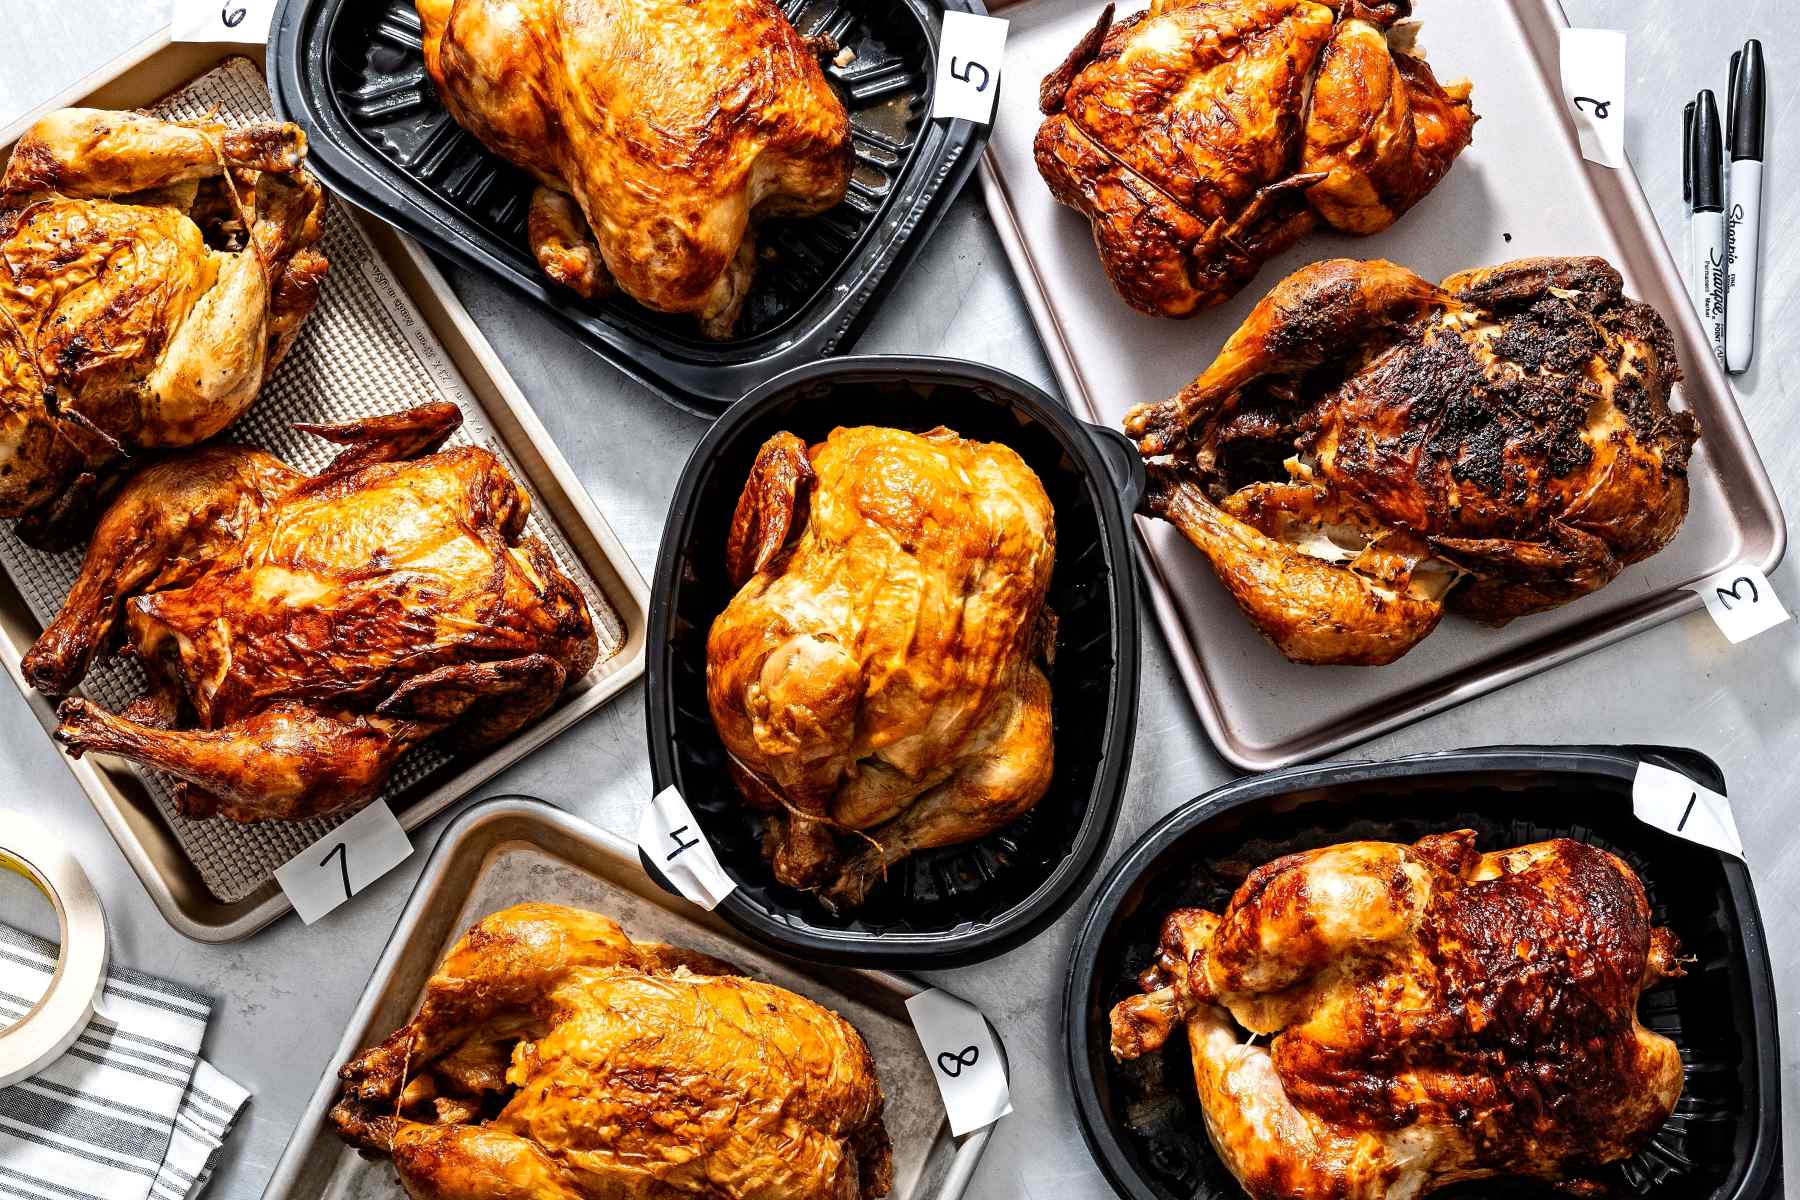 The Shocking Truth About The Calorie Content Of Supermarket Rotisserie Chicken With Skin!